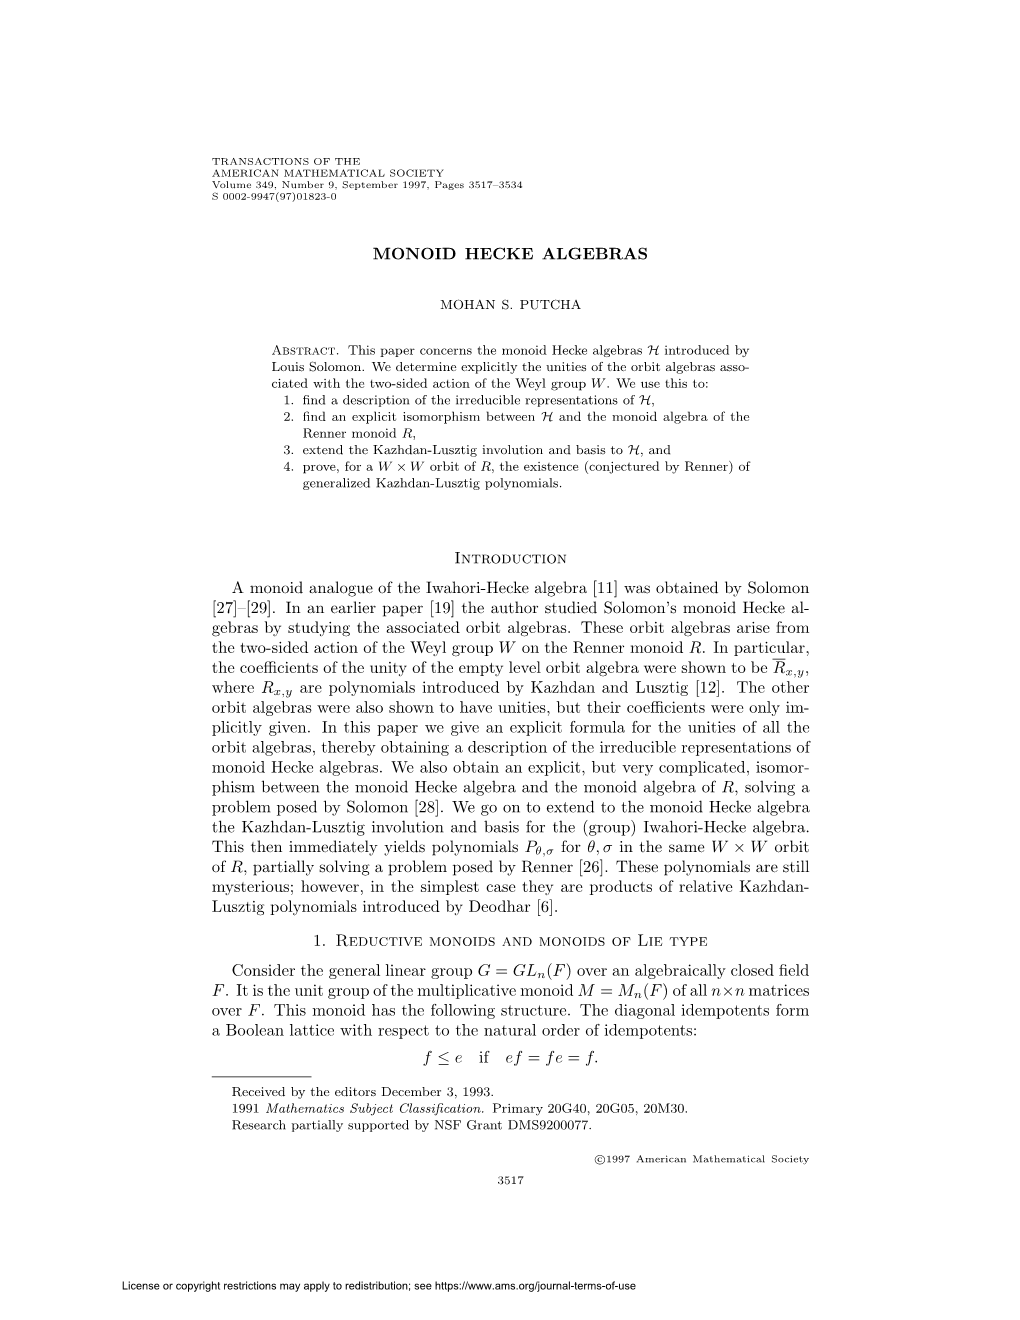 MONOID HECKE ALGEBRAS Introduction a Monoid Analogue Of